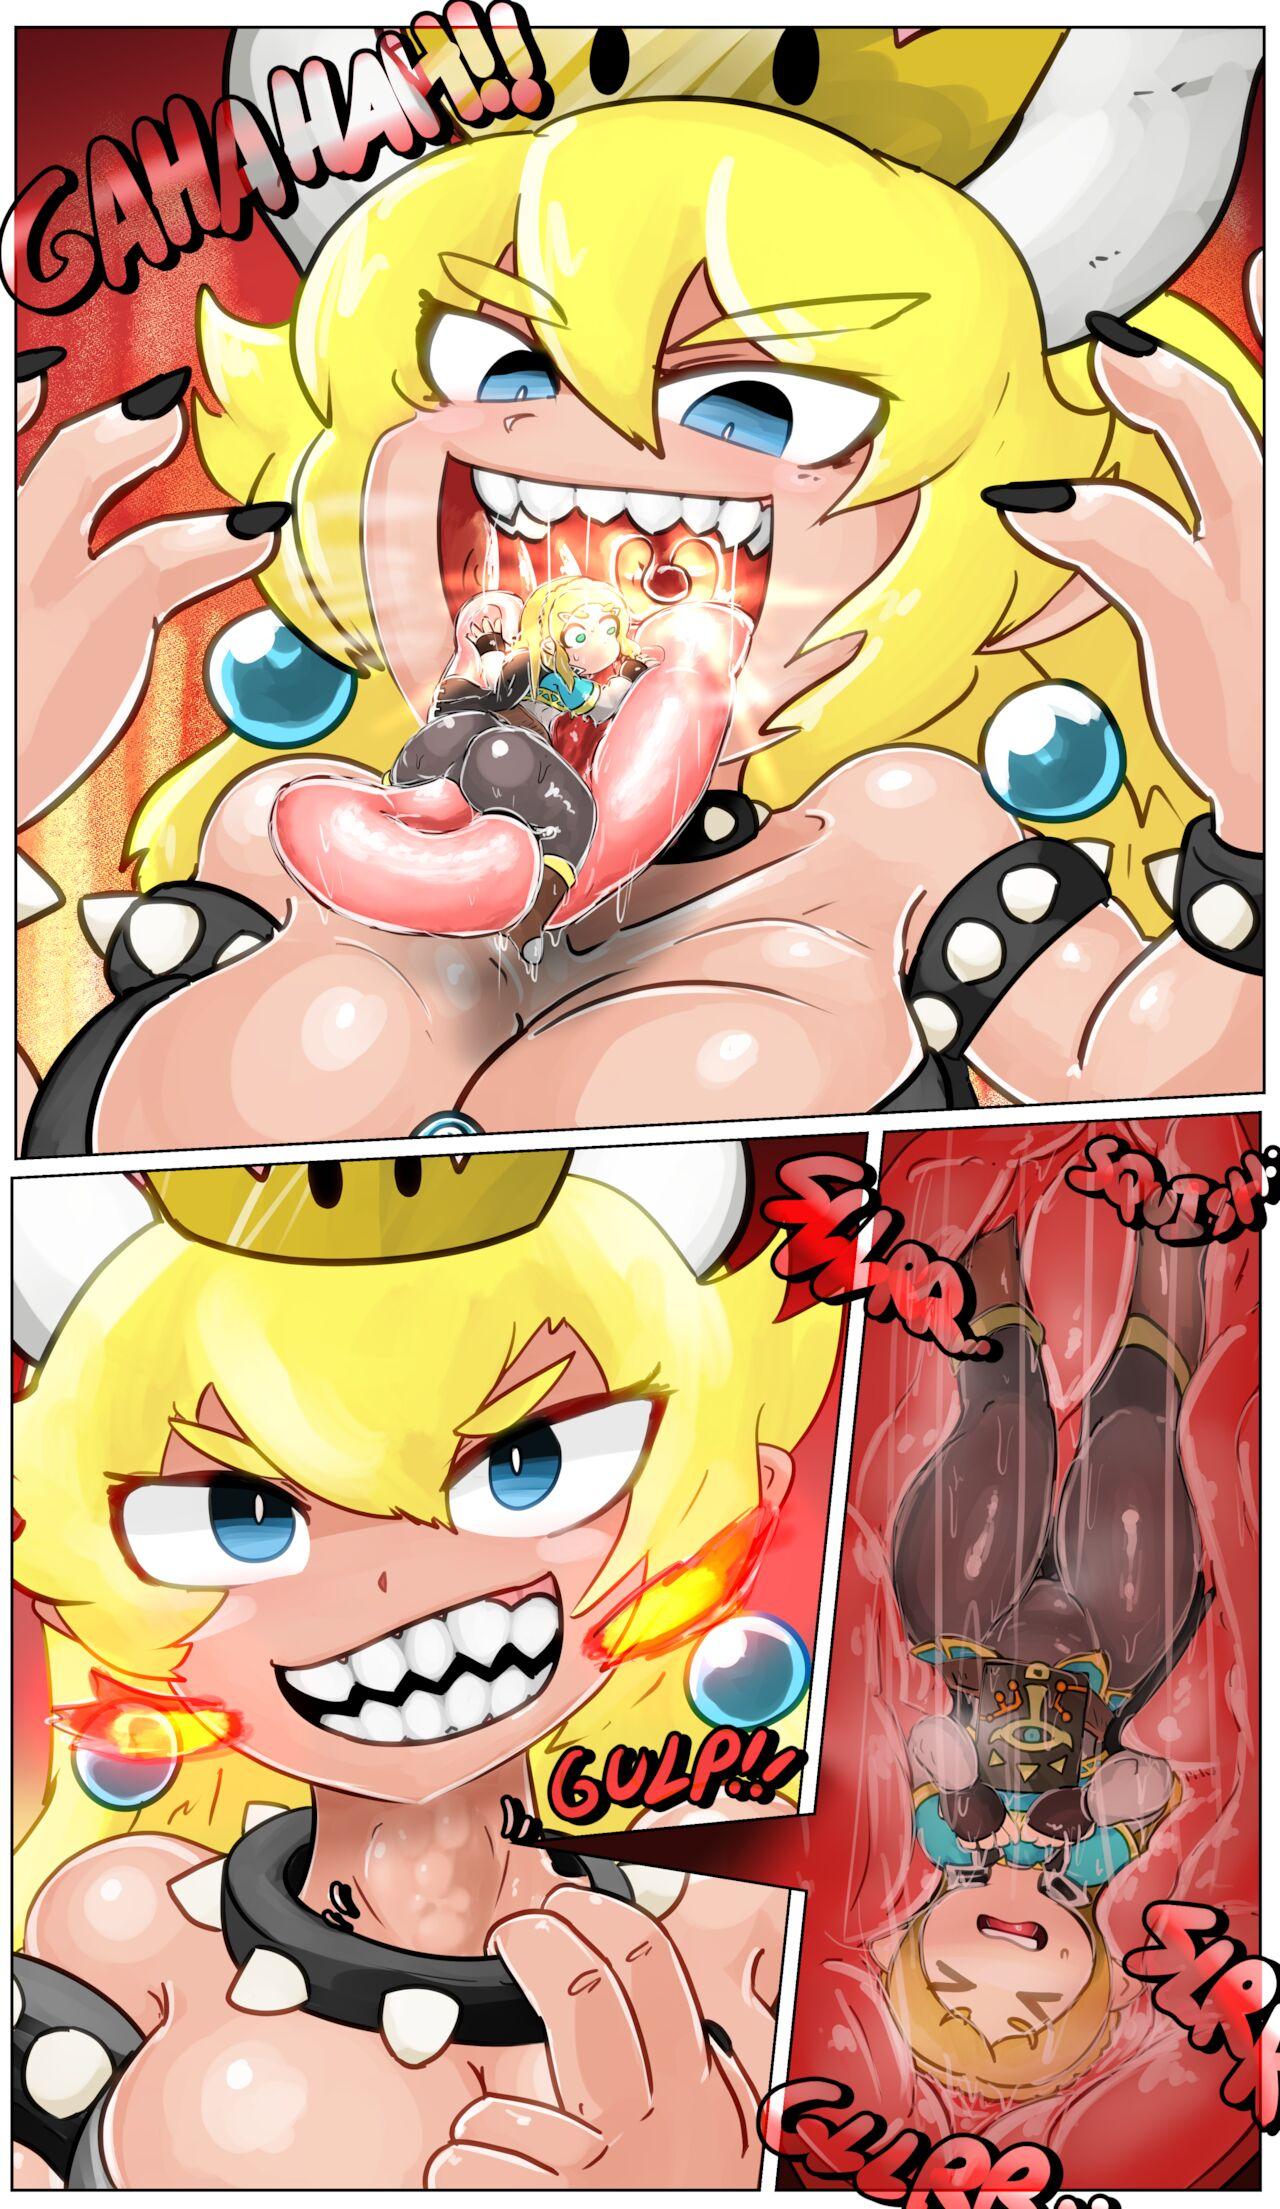 Licking Pussy Bowsette Inside Story - The legend of zelda Super mario brothers | super mario bros. Rope - Page 2